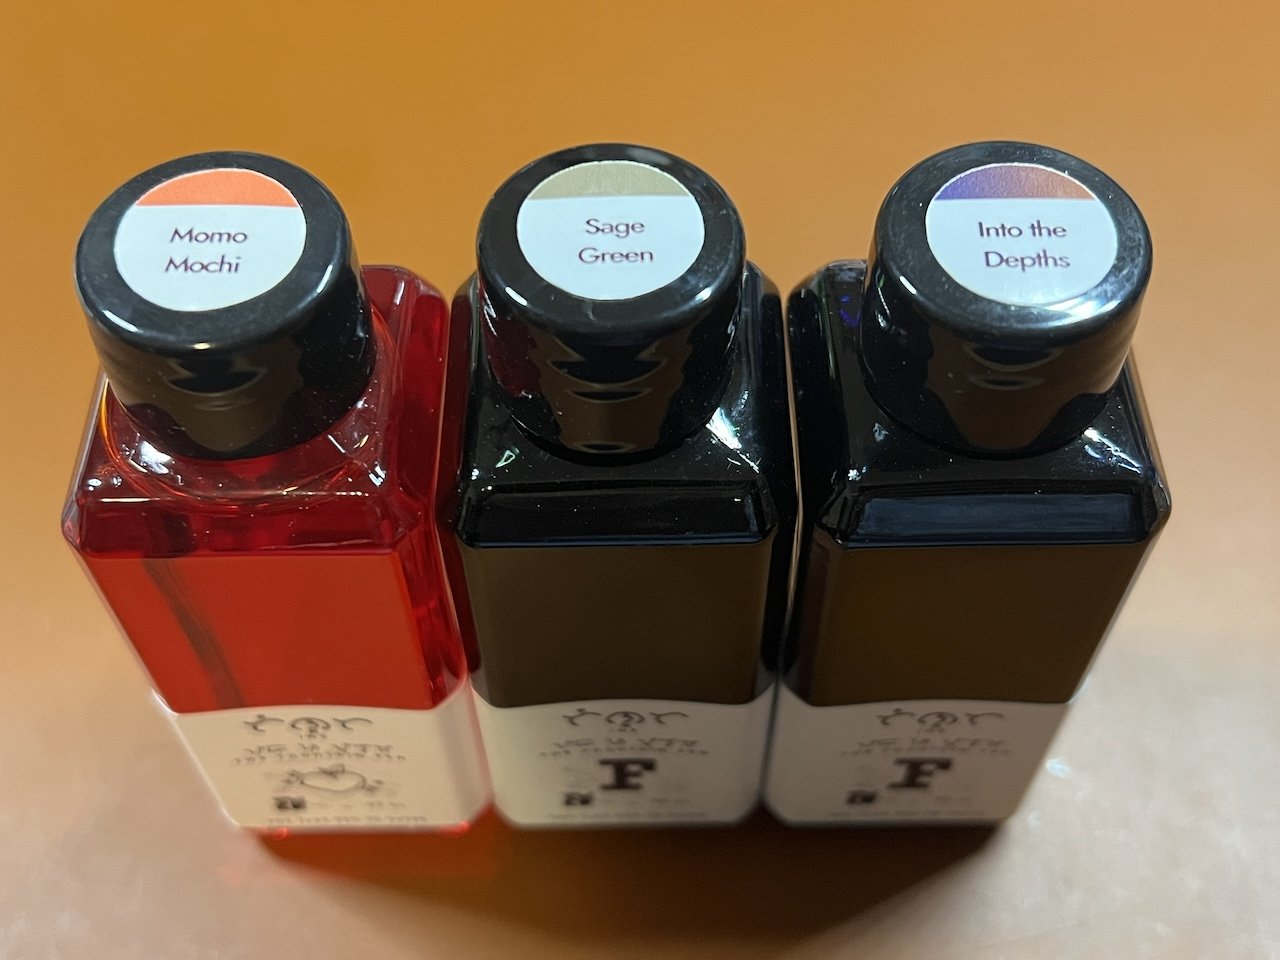 ASK FLAX - Will all inks work in a fountain pen? Why not? - FLAX art &  design